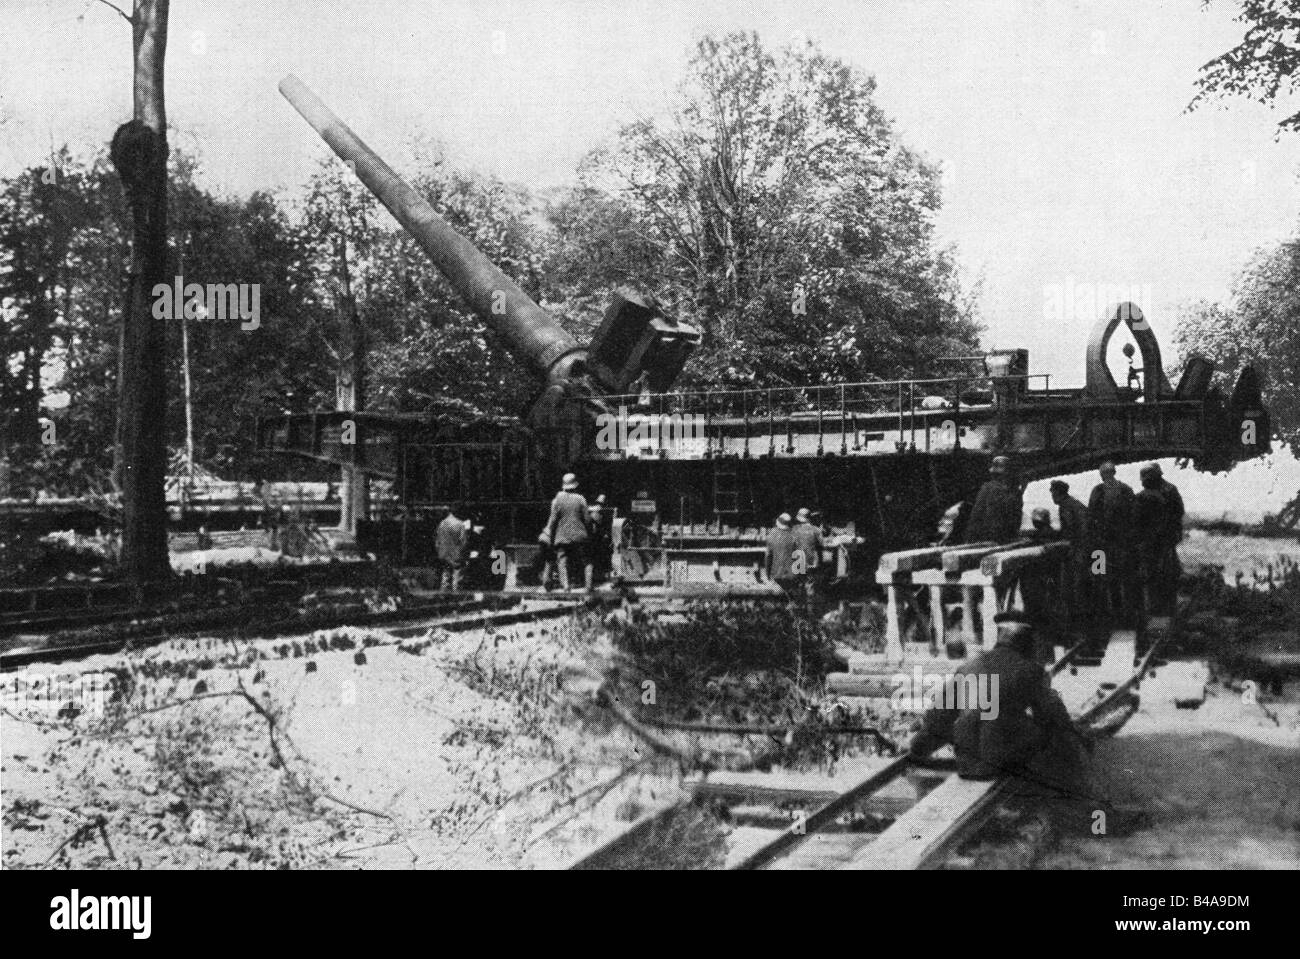 events, First World War / WWI, Western Front, German 38 cm gun 'Langer Max' (Long Max) near Bapaume ready to fire, France, June 1918, Stock Photo